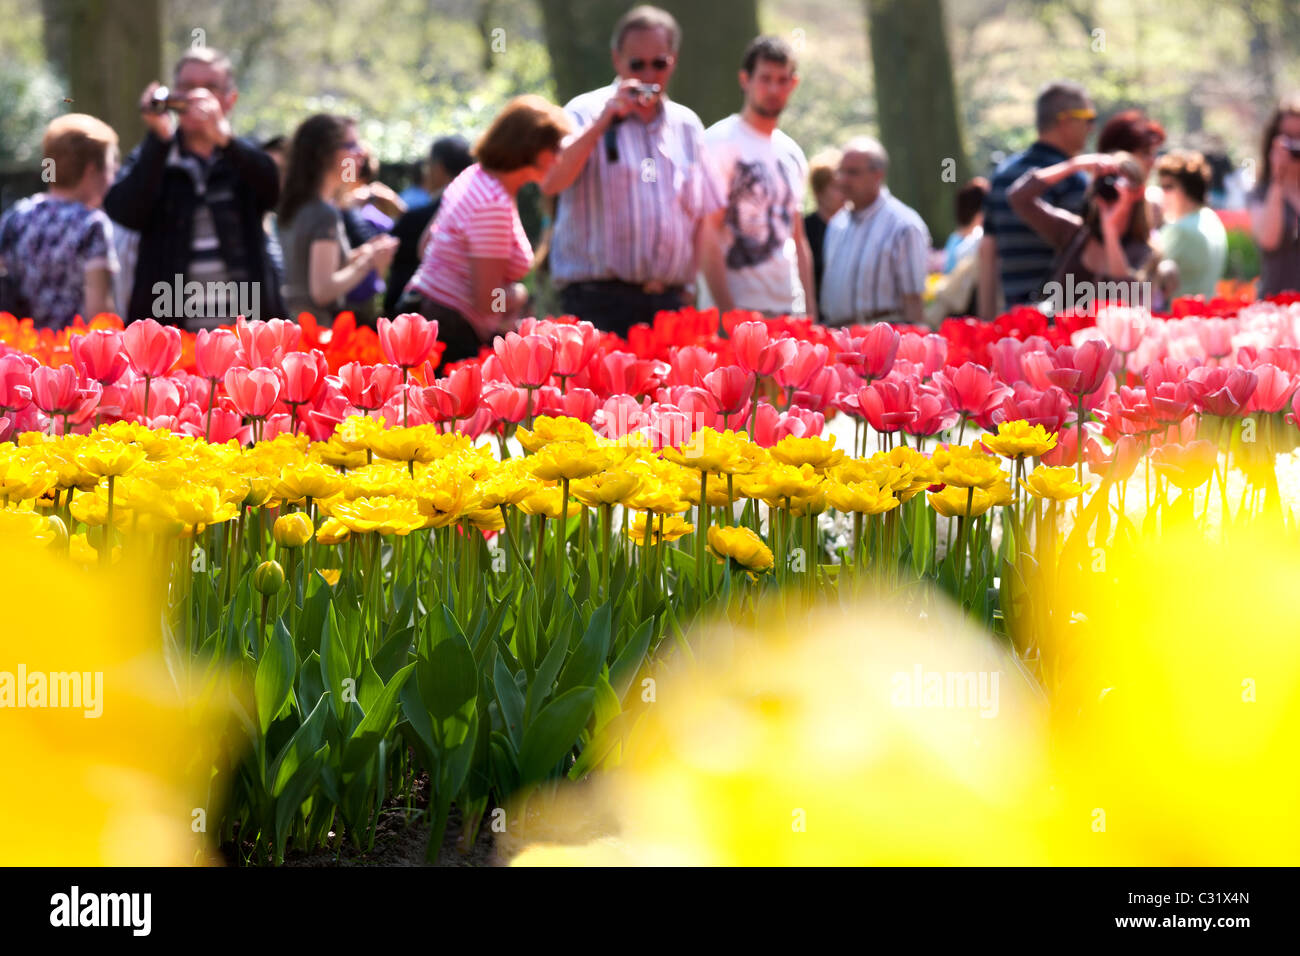 Visitors taking pictures of tulips at the Keukenhof Flower Garden Lisse. Tourist attraction drawing huge crowds on a sunny day. Stock Photo